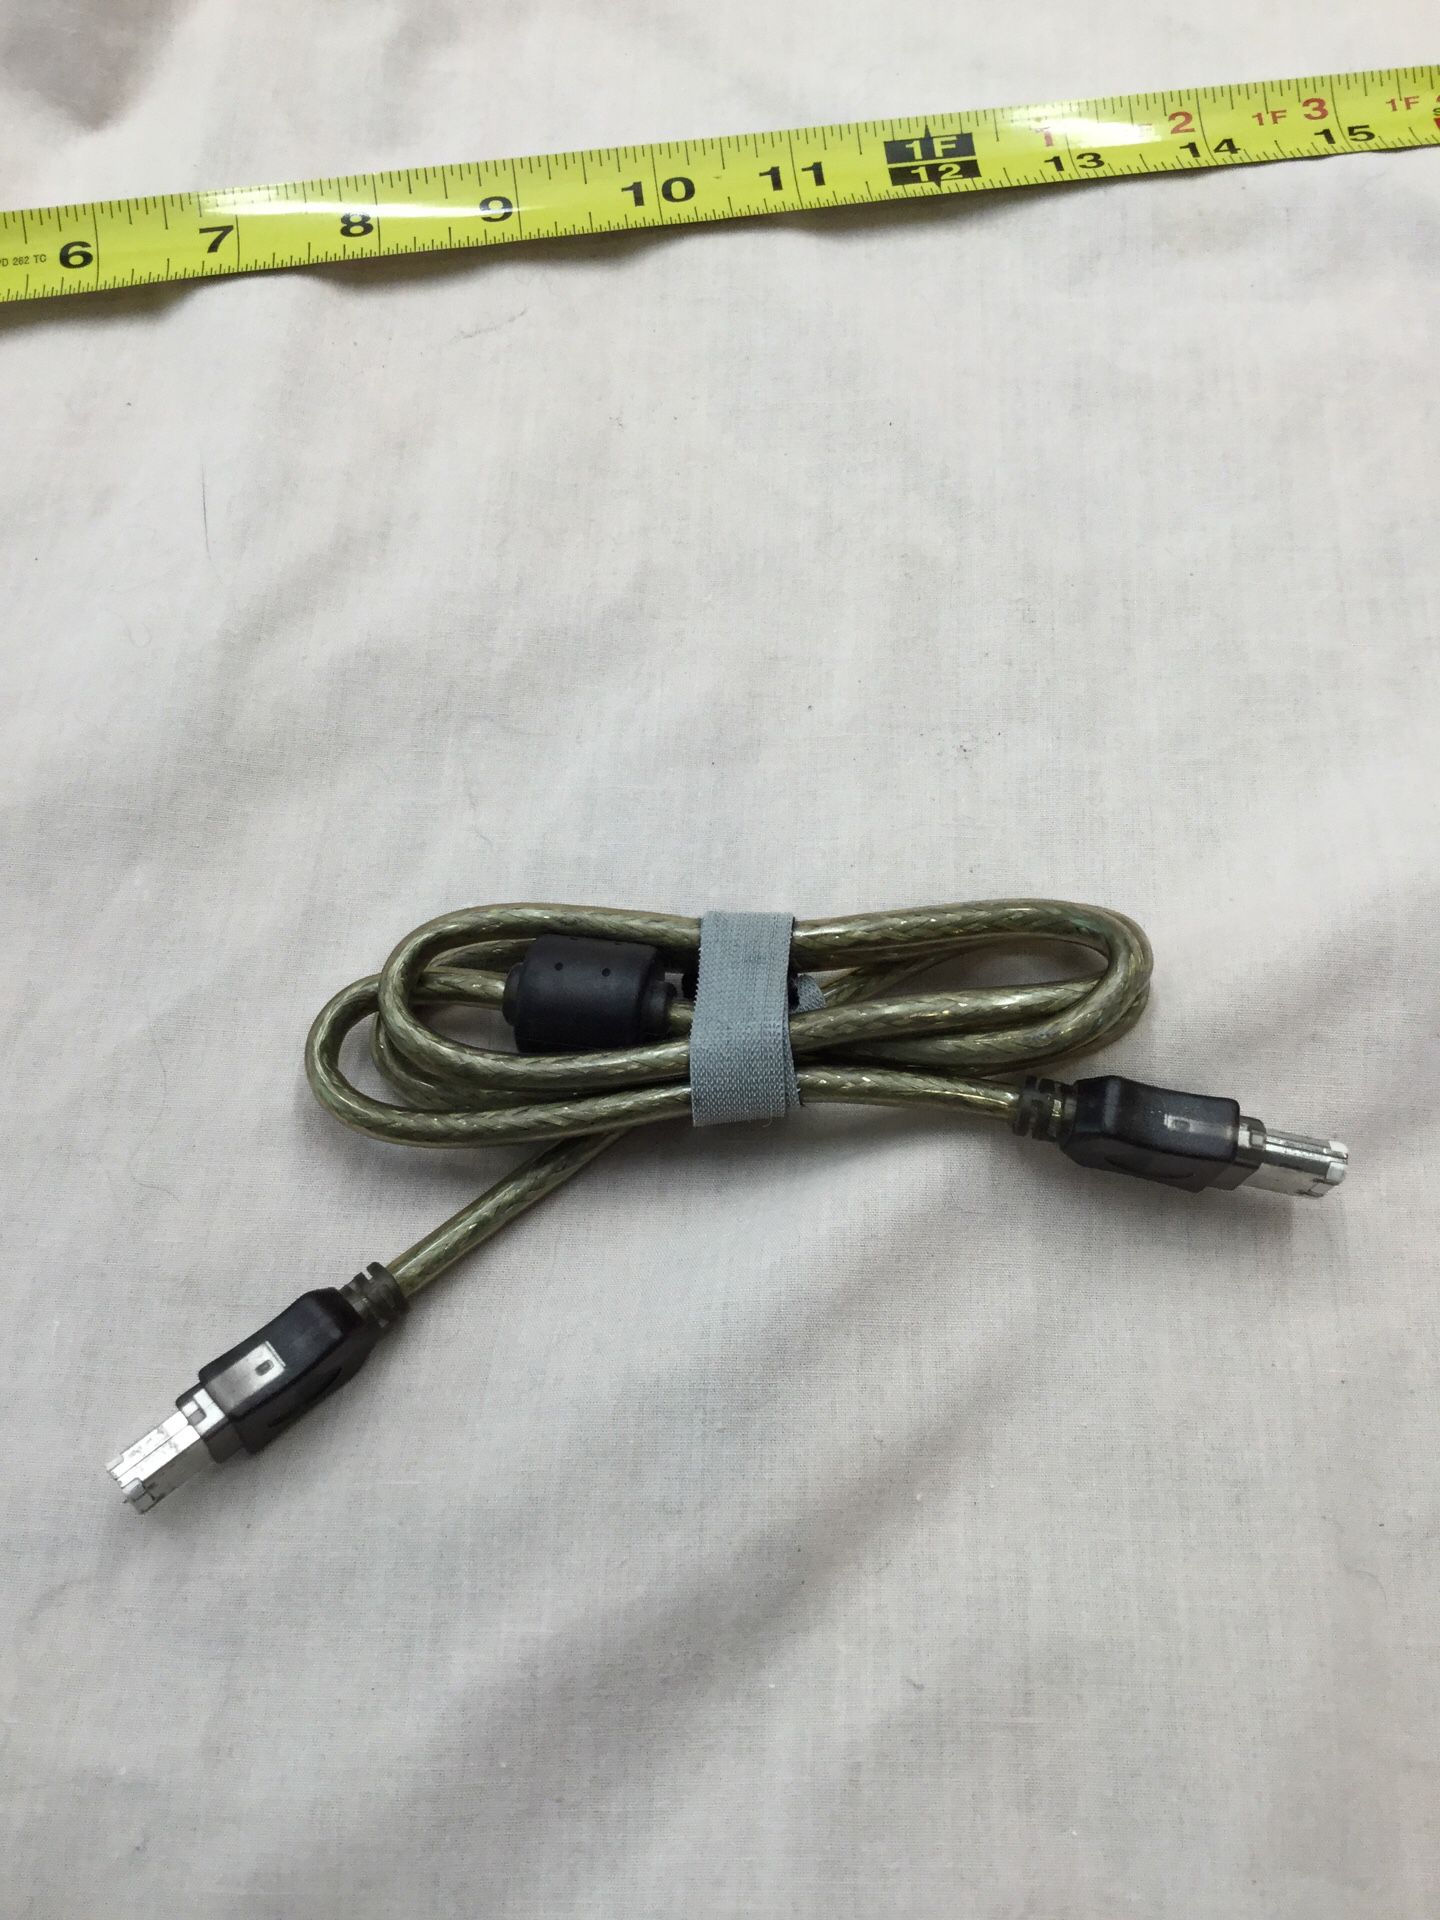 Apple fire wire cable 6 foot